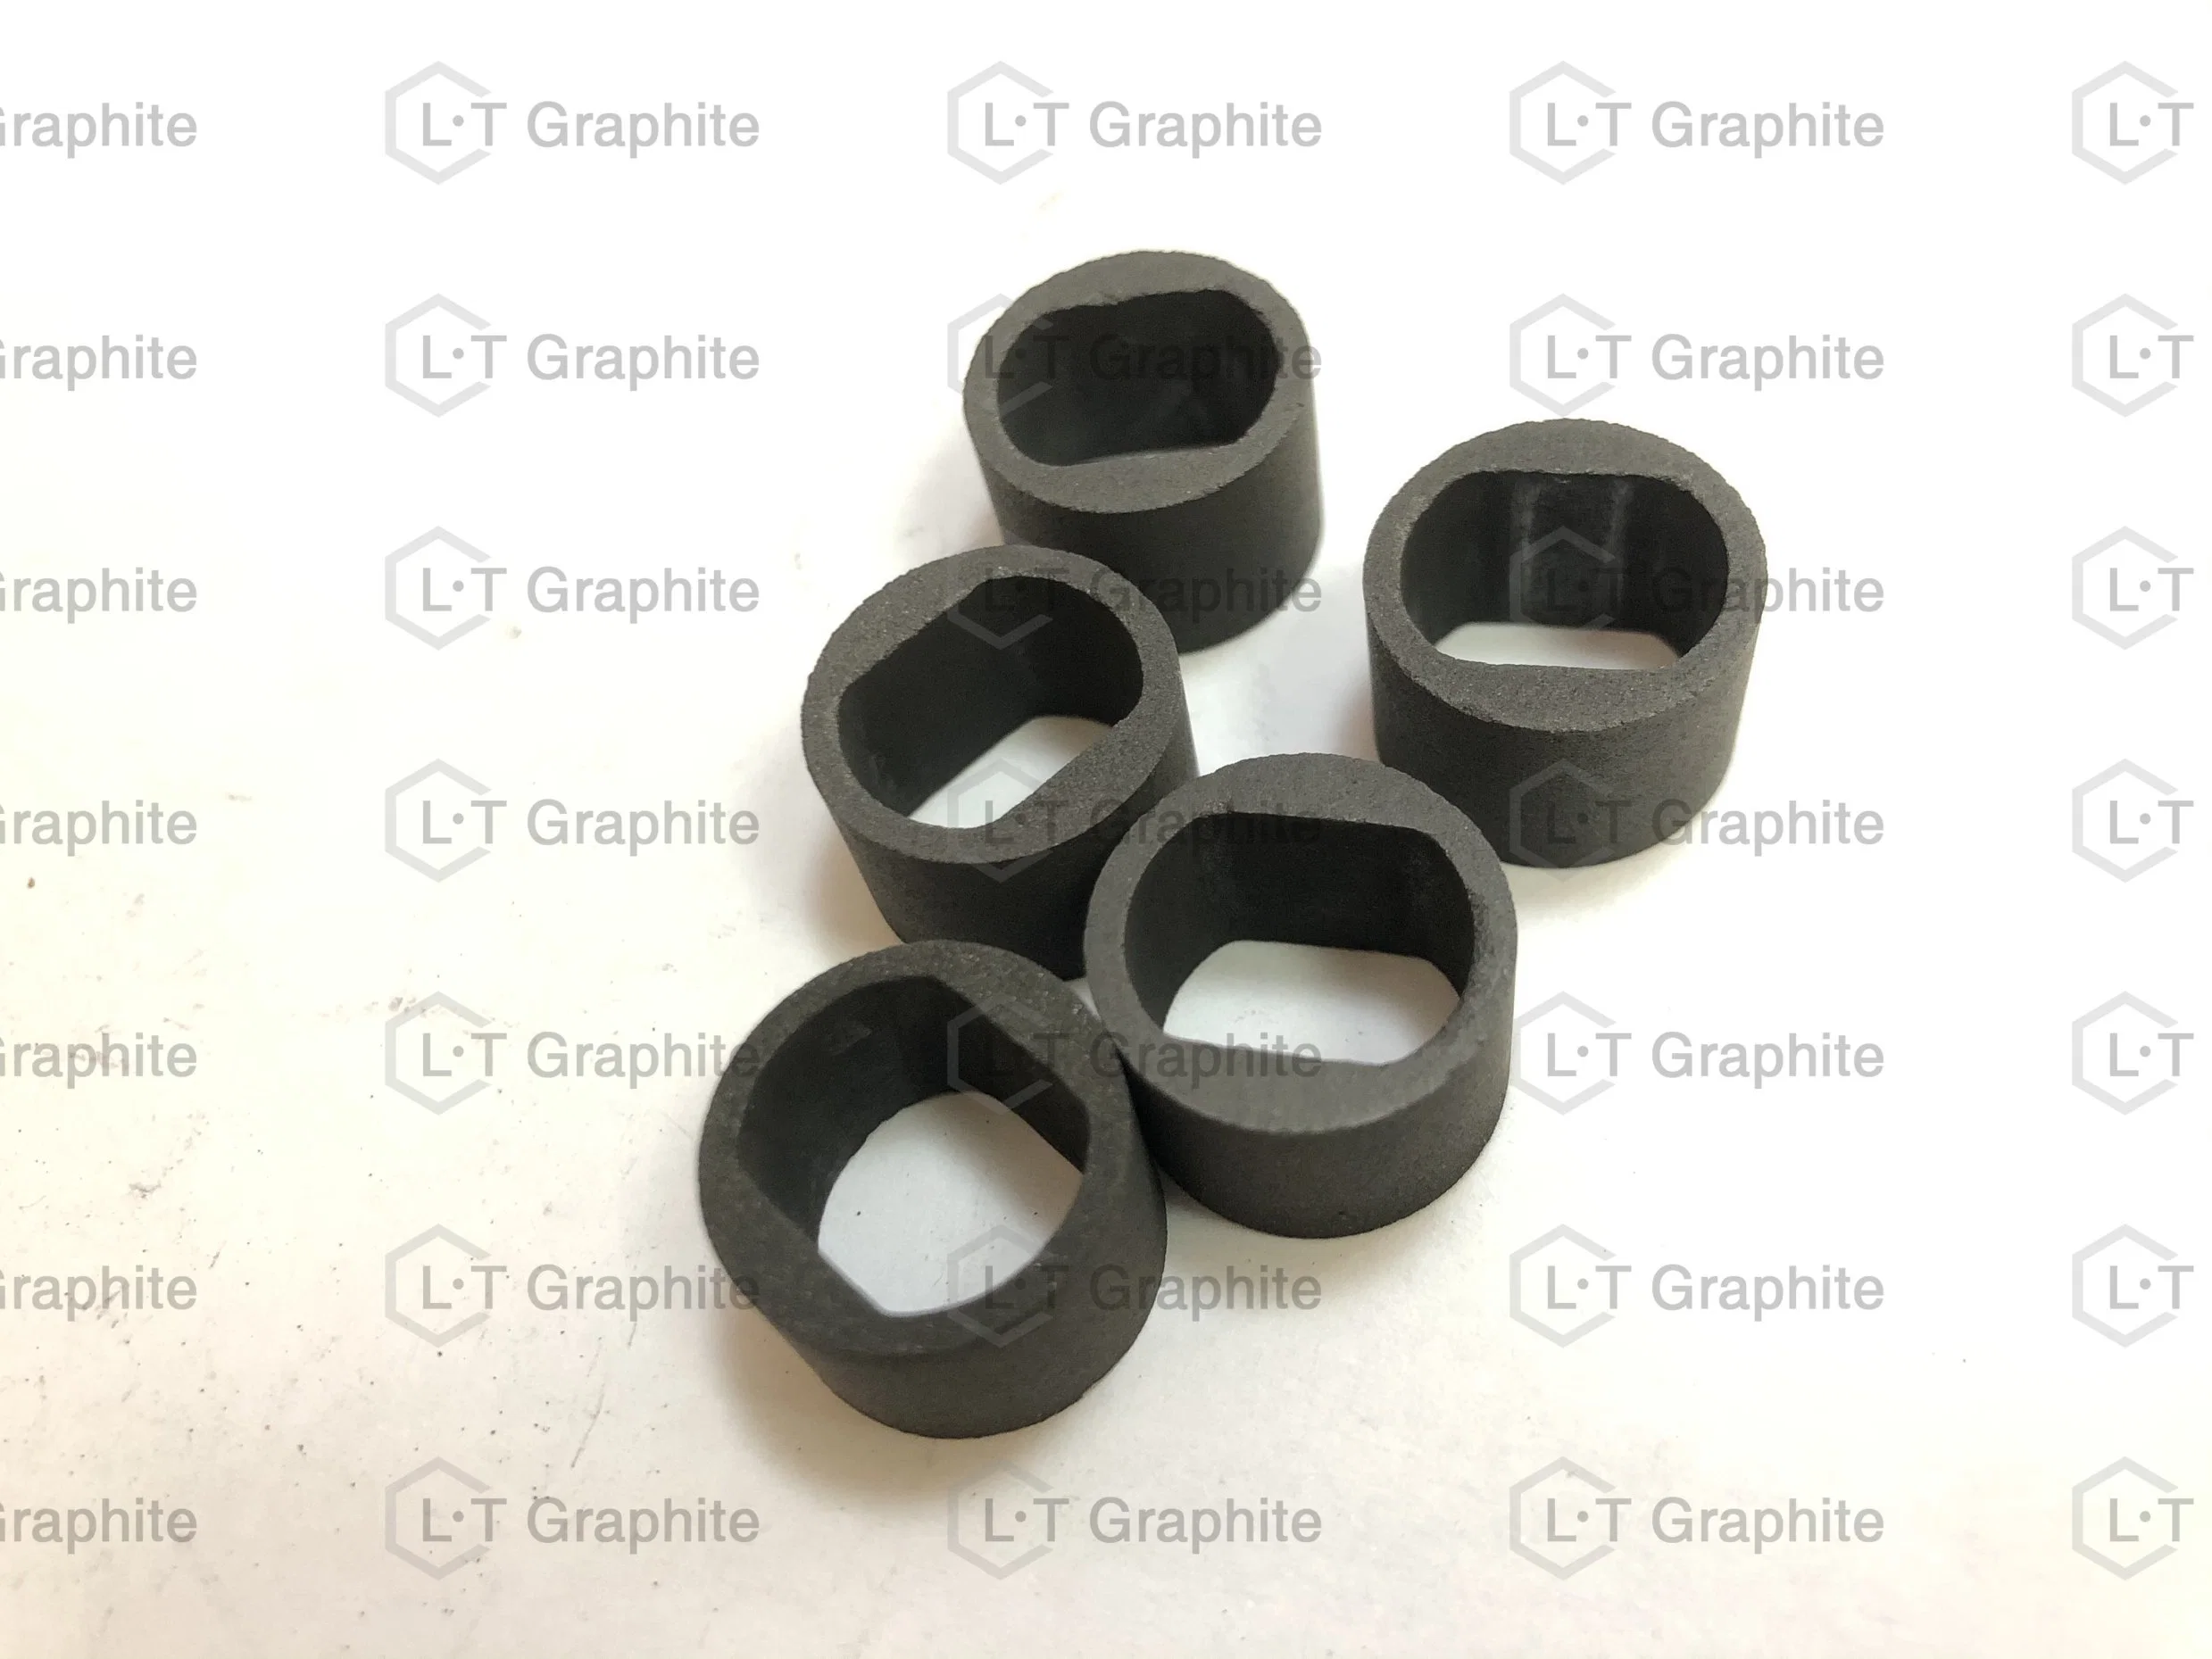 Minimized Abrasion Specialty Graphite Resin Bearings for Fluid- Handling Pumps